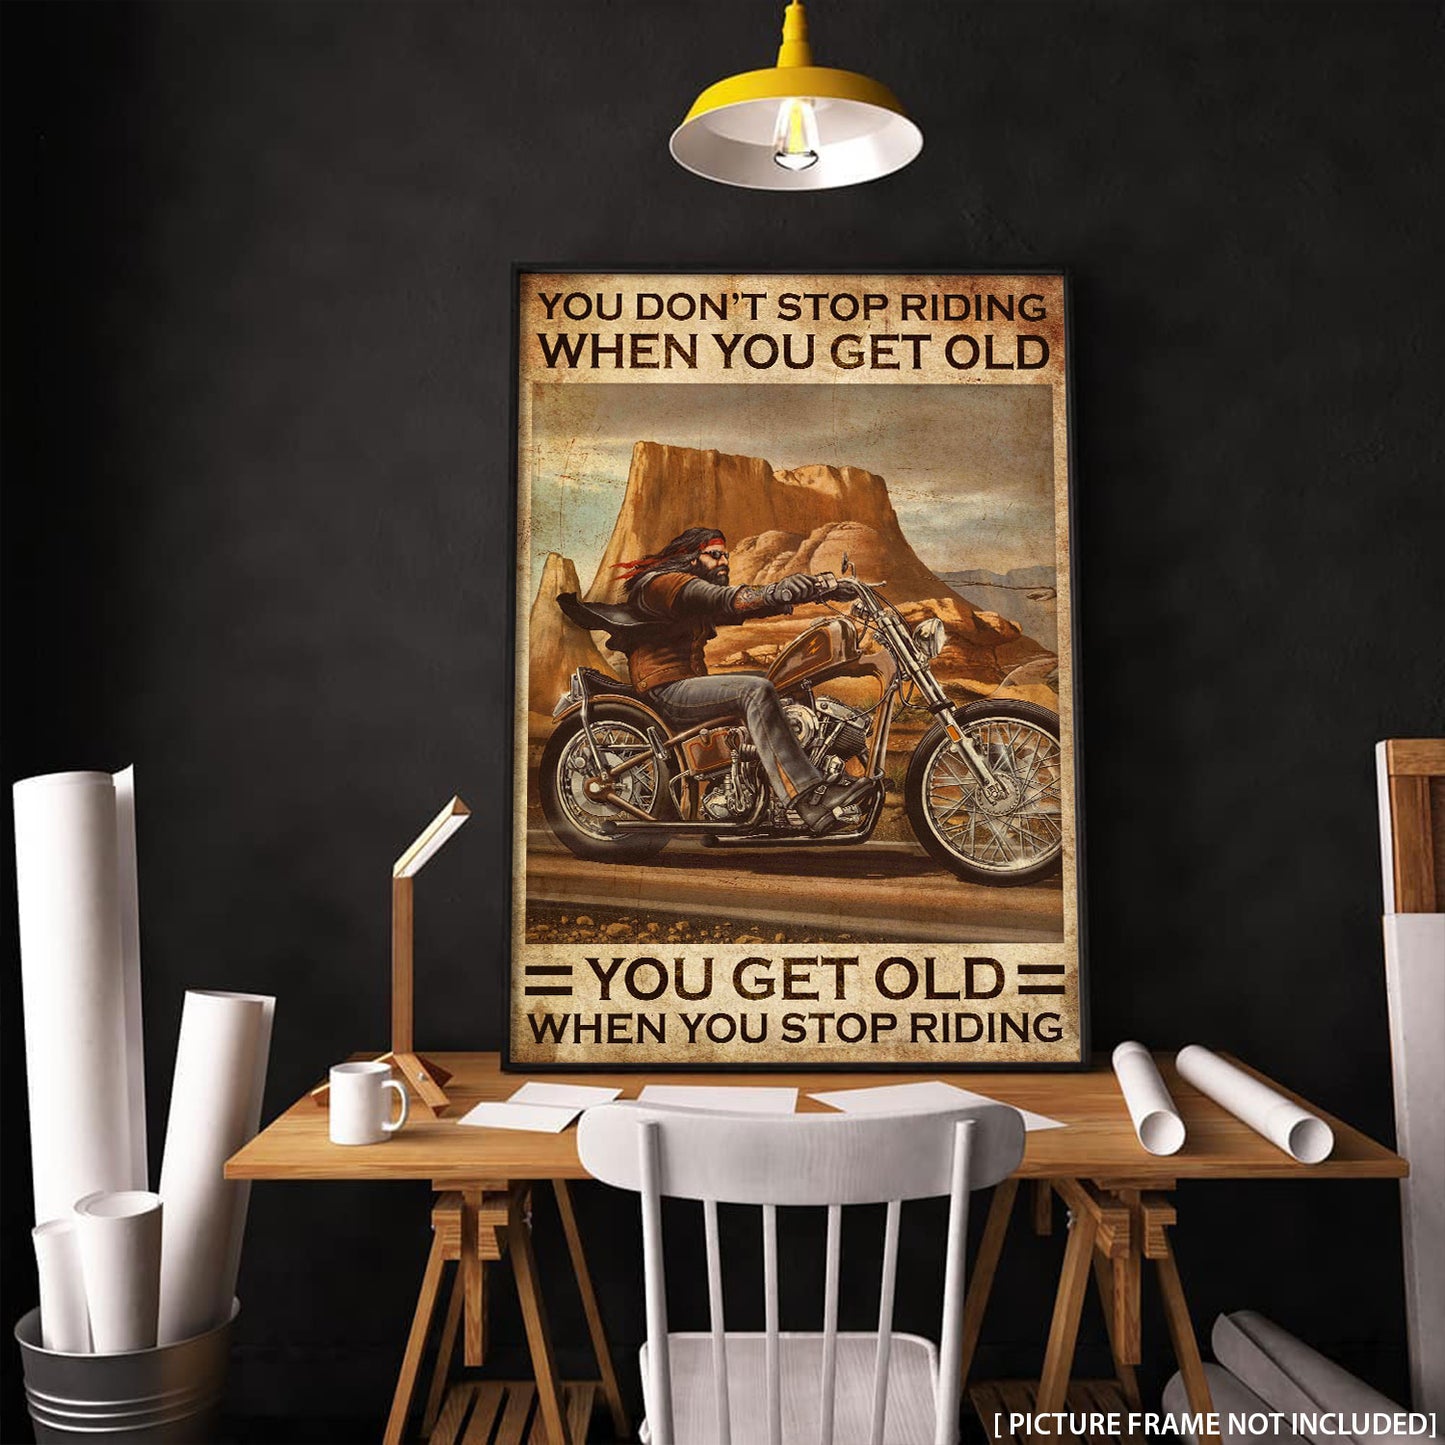 You Don't Stop Riding When You Get Old Motorcycle Poster